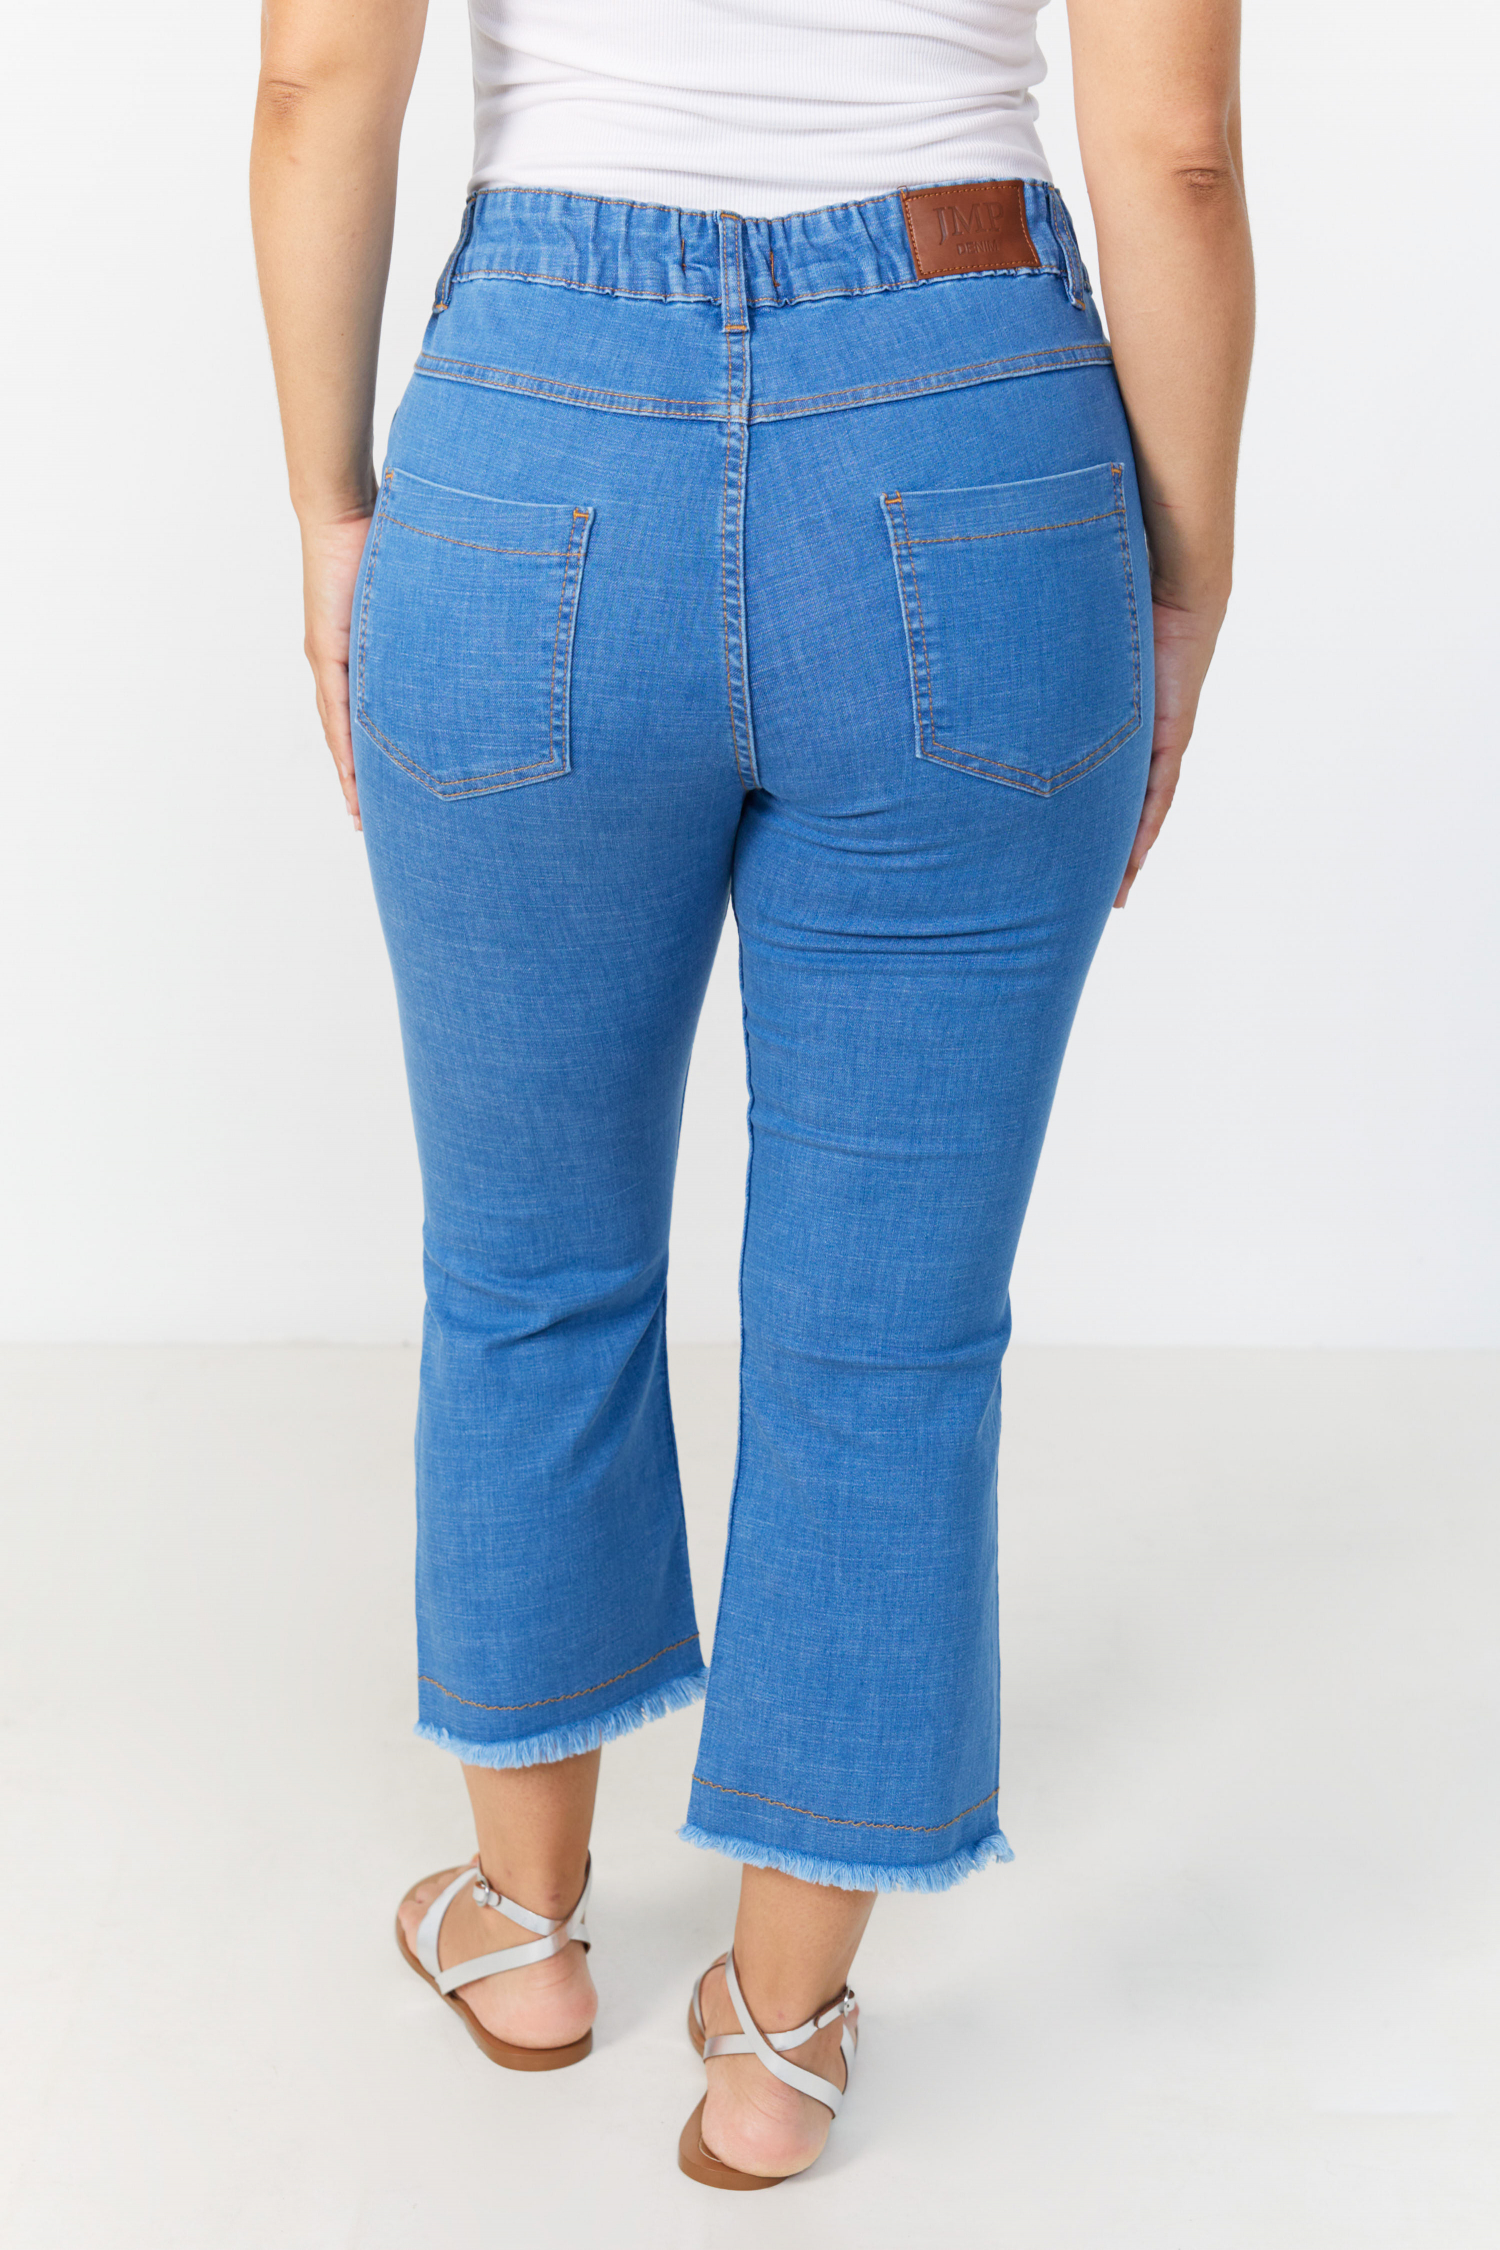 7/8 jeans with fringes at the bottom